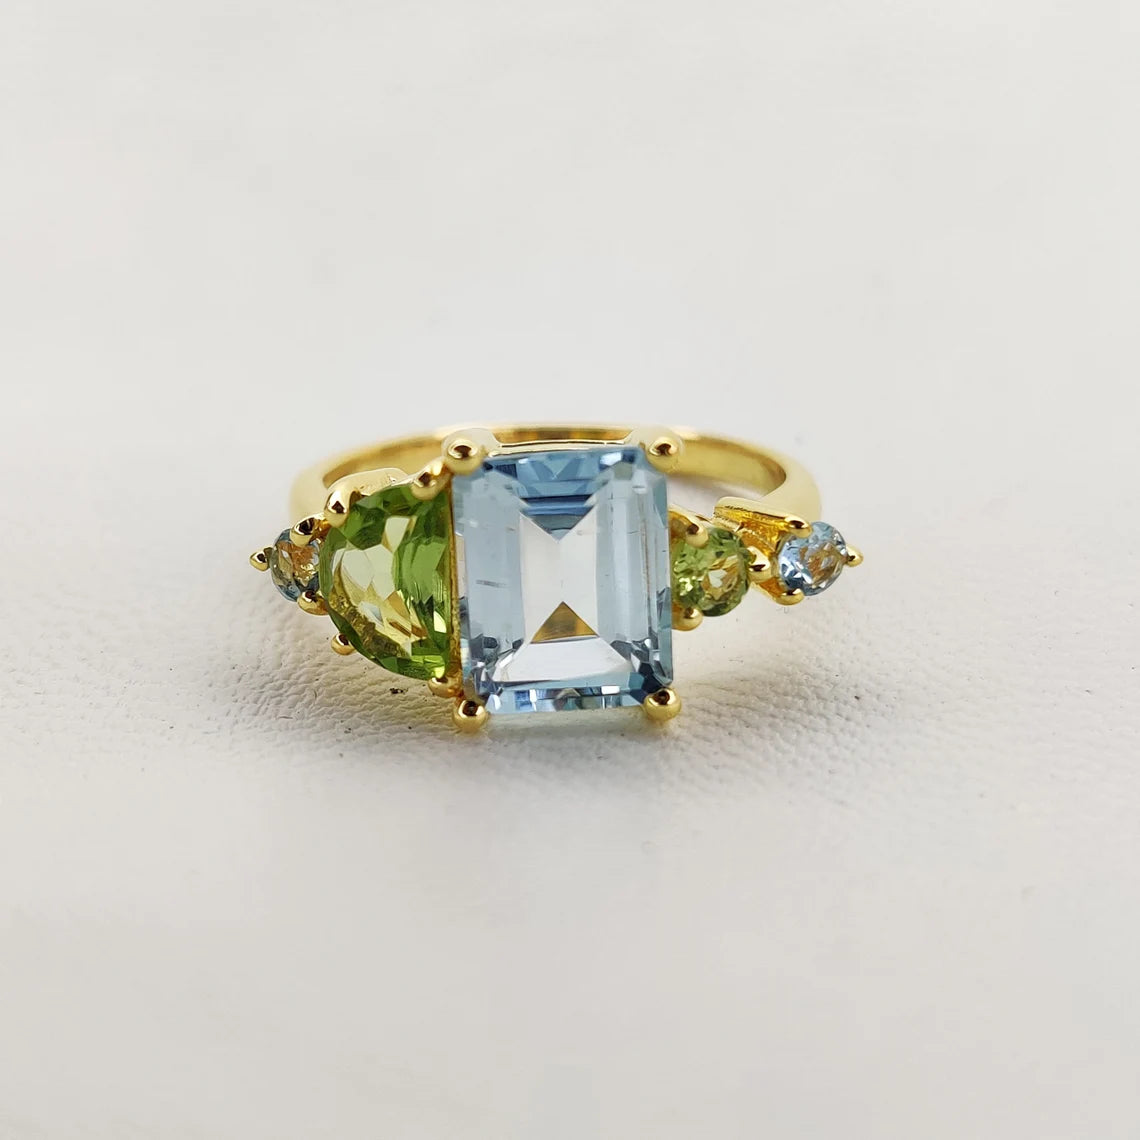 Beautiful Blue Topaz and Peridot Faceted Gemstone Sterling Silver in Gold Plating Ring